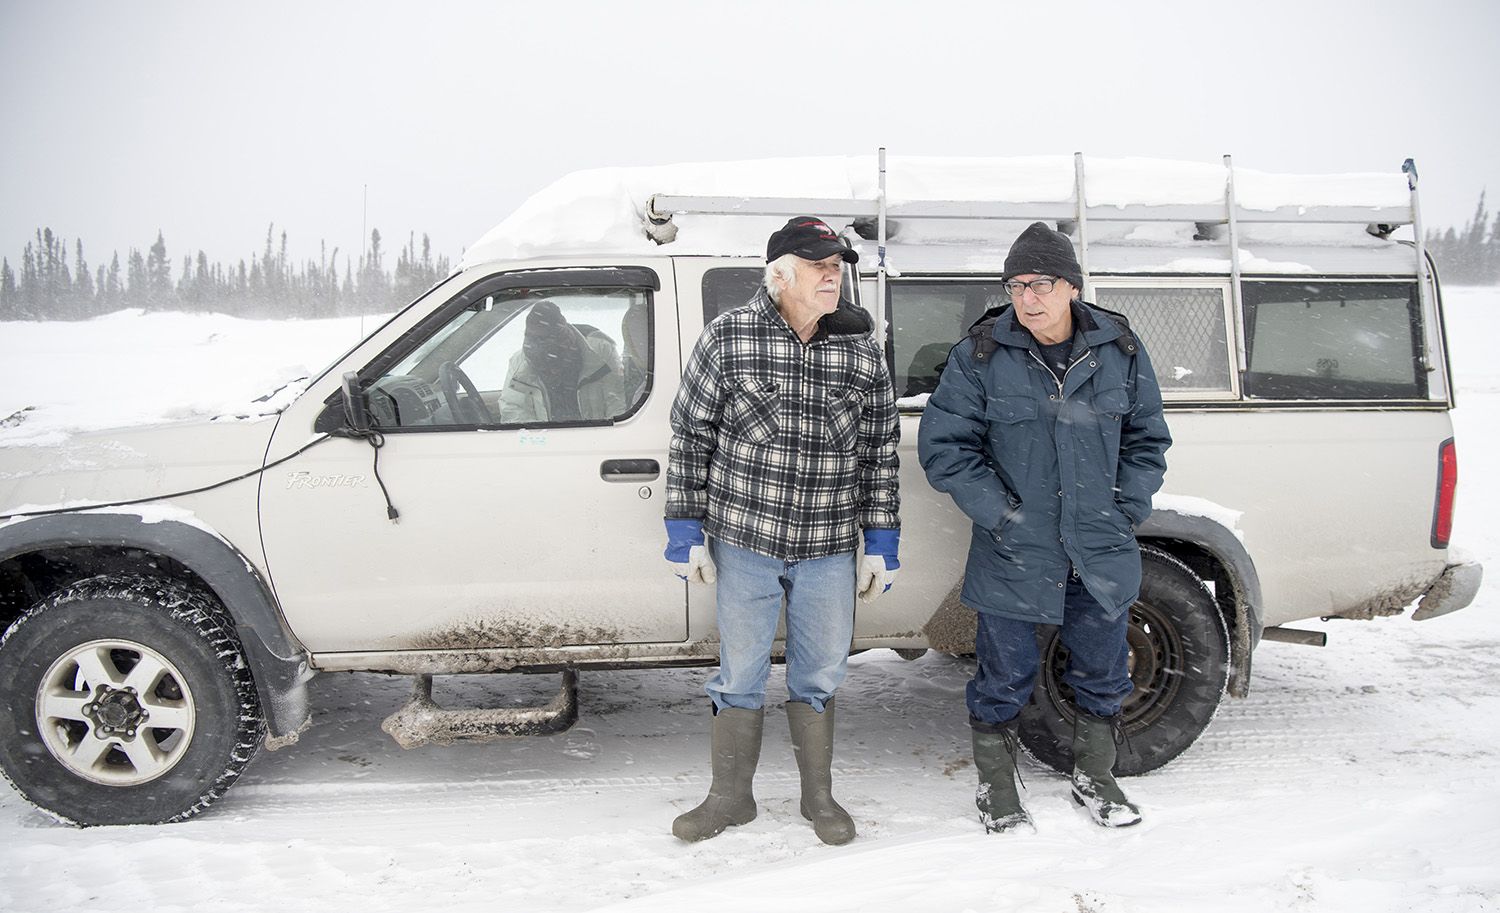 Jim Learning, left, and Davis stand by Learning’s truck at the gate to Muskrat Falls Generating Facility on the North Spur near Happy Valley-Goose Bay, Newfoundland and Labrador, on Nov. 16, 2019. Image by Michael G. Seamans. Canada, 2019.